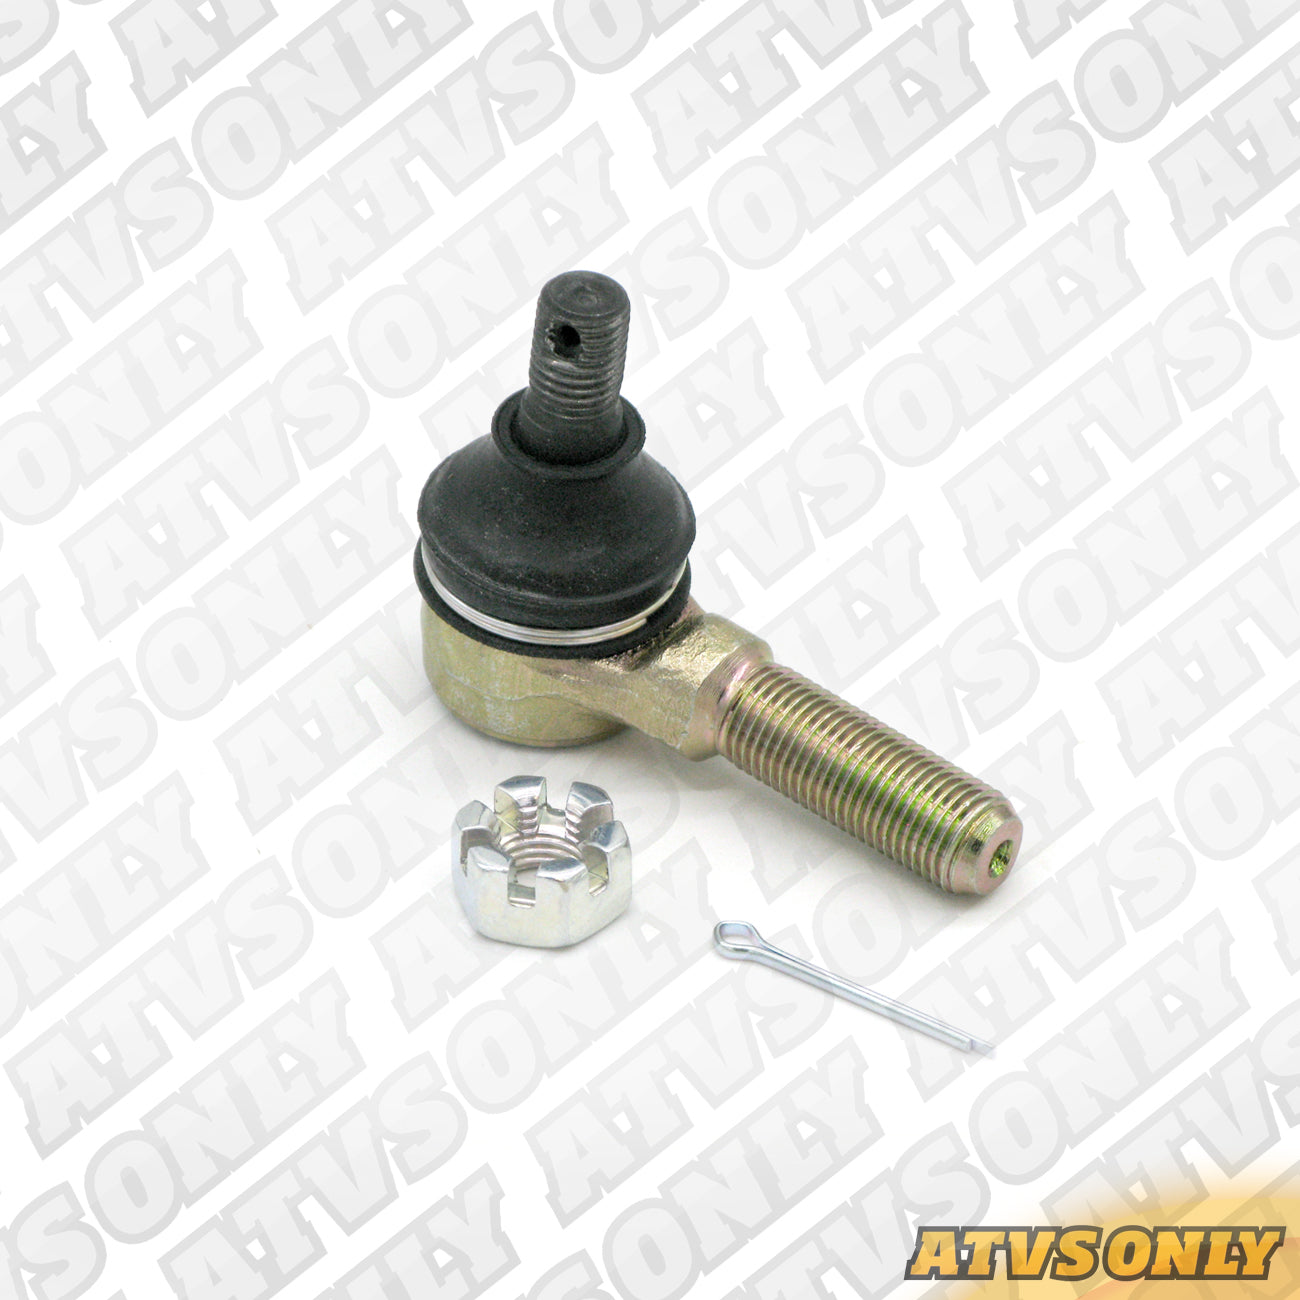 A-Arm Tie Rod Ends (Left & Right Handed Threads) for M12x1.25 Applications